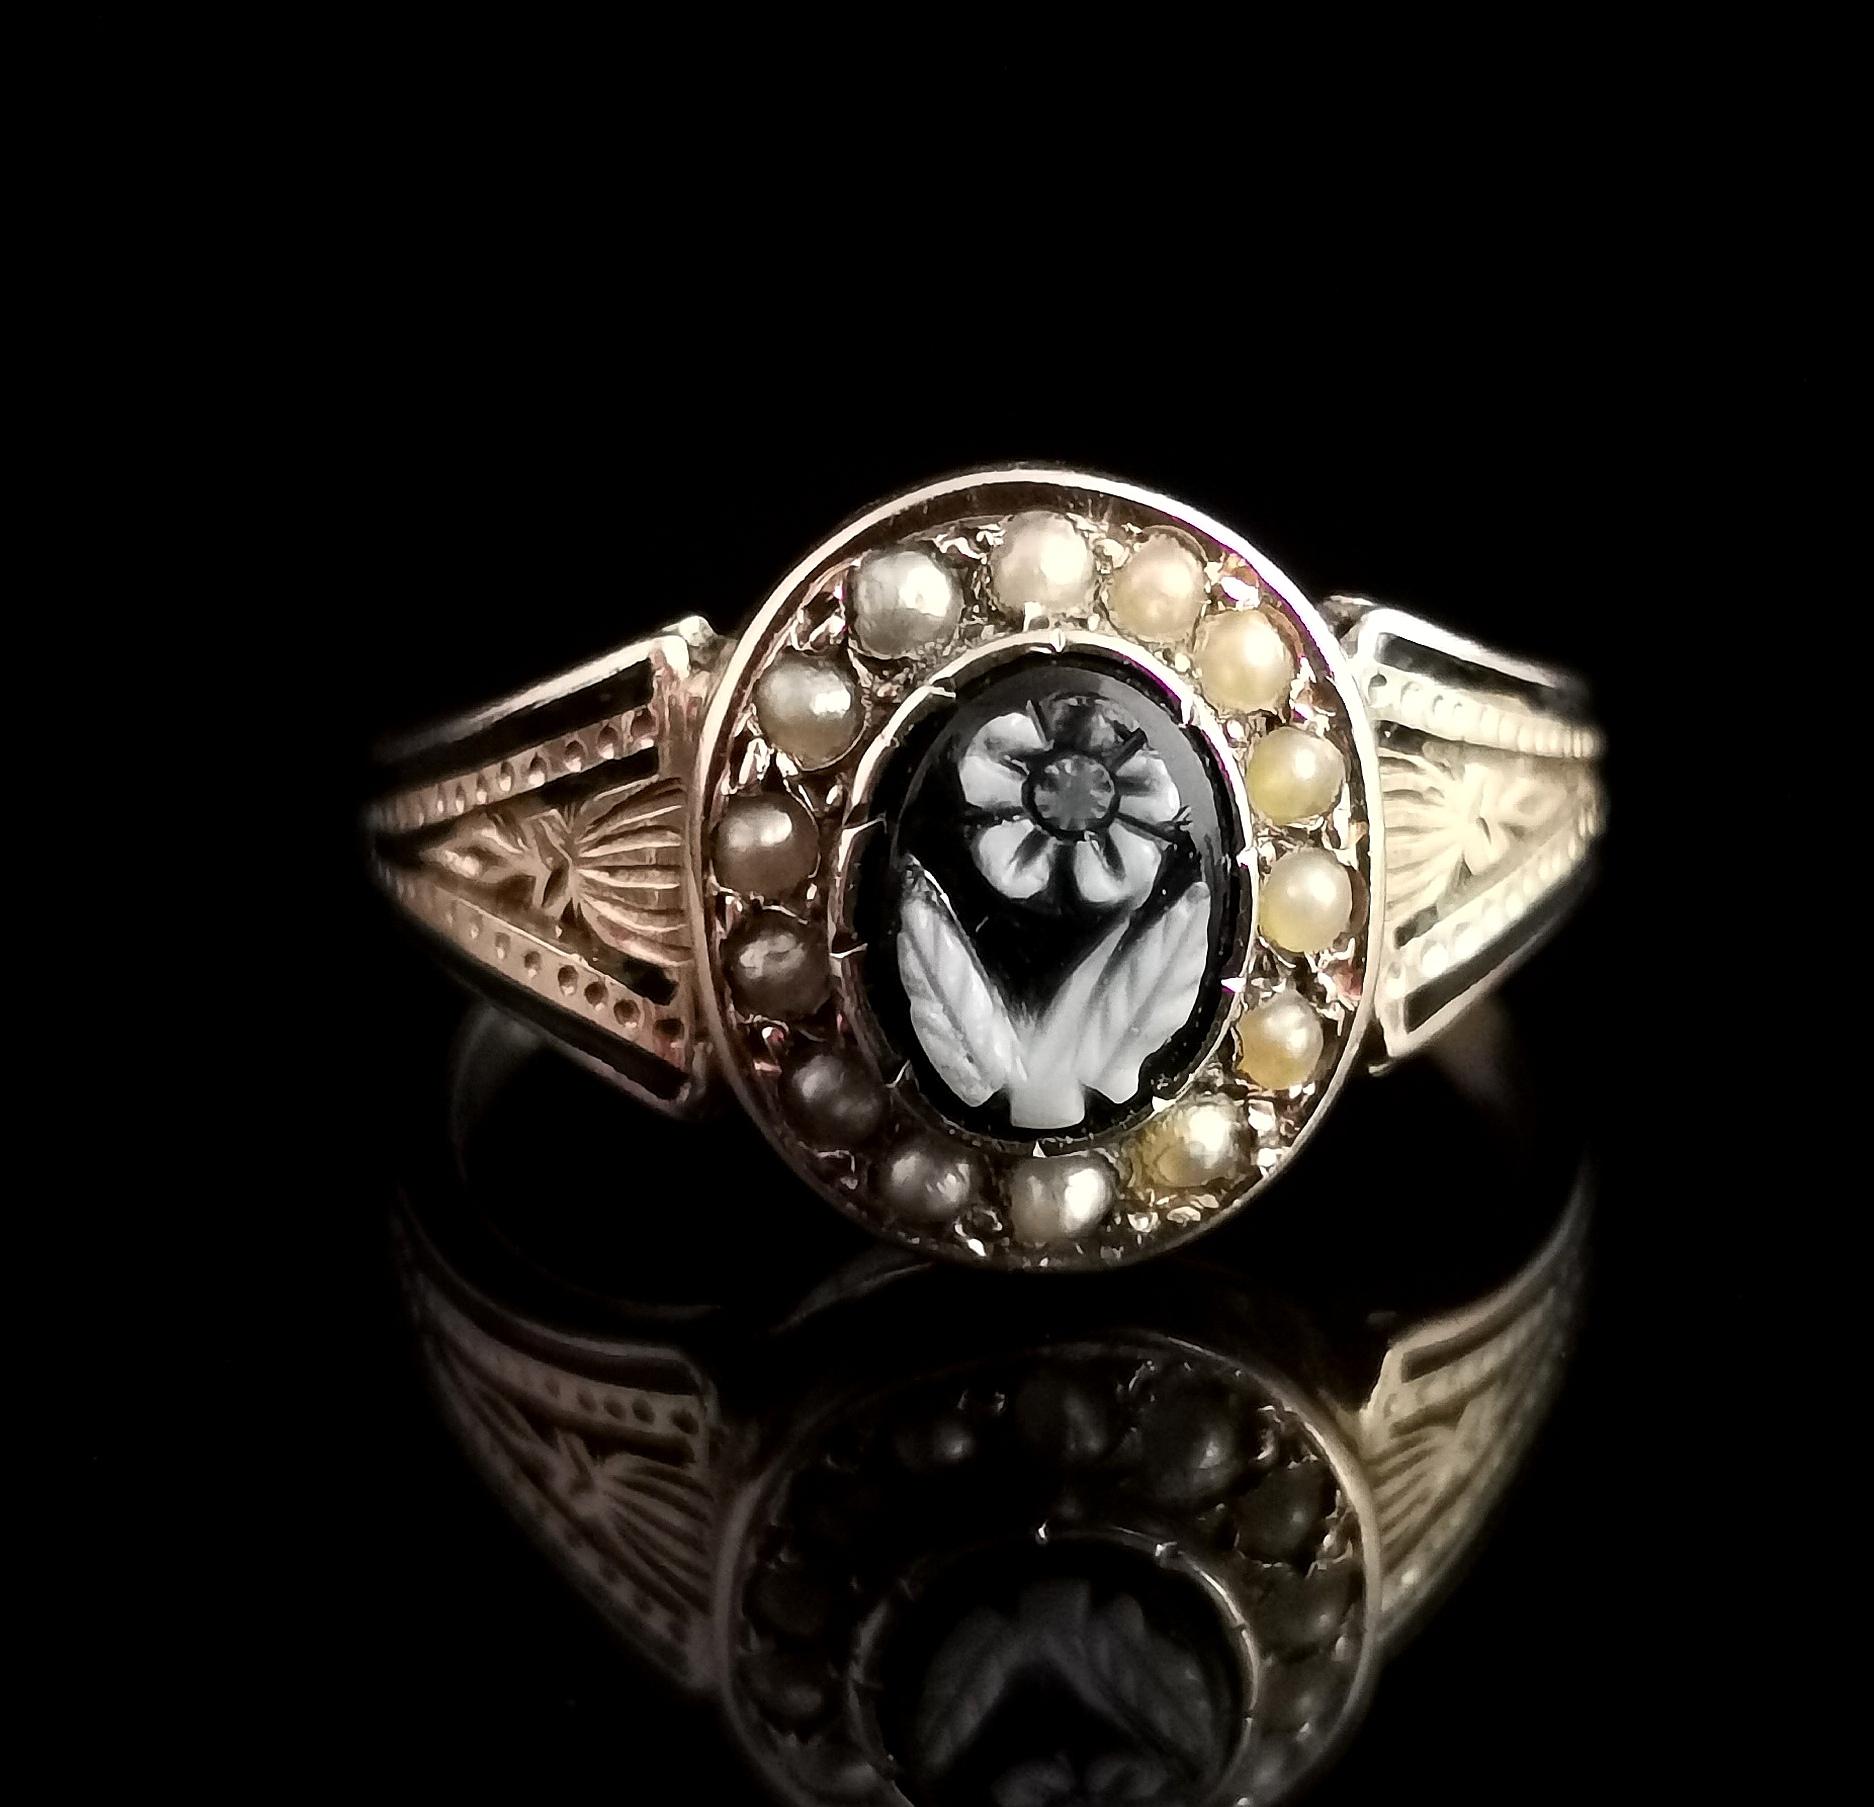 Women's Victorian Mourning Ring, 15k Gold and Black Enamel, Agate Forget Me Not, Pearl